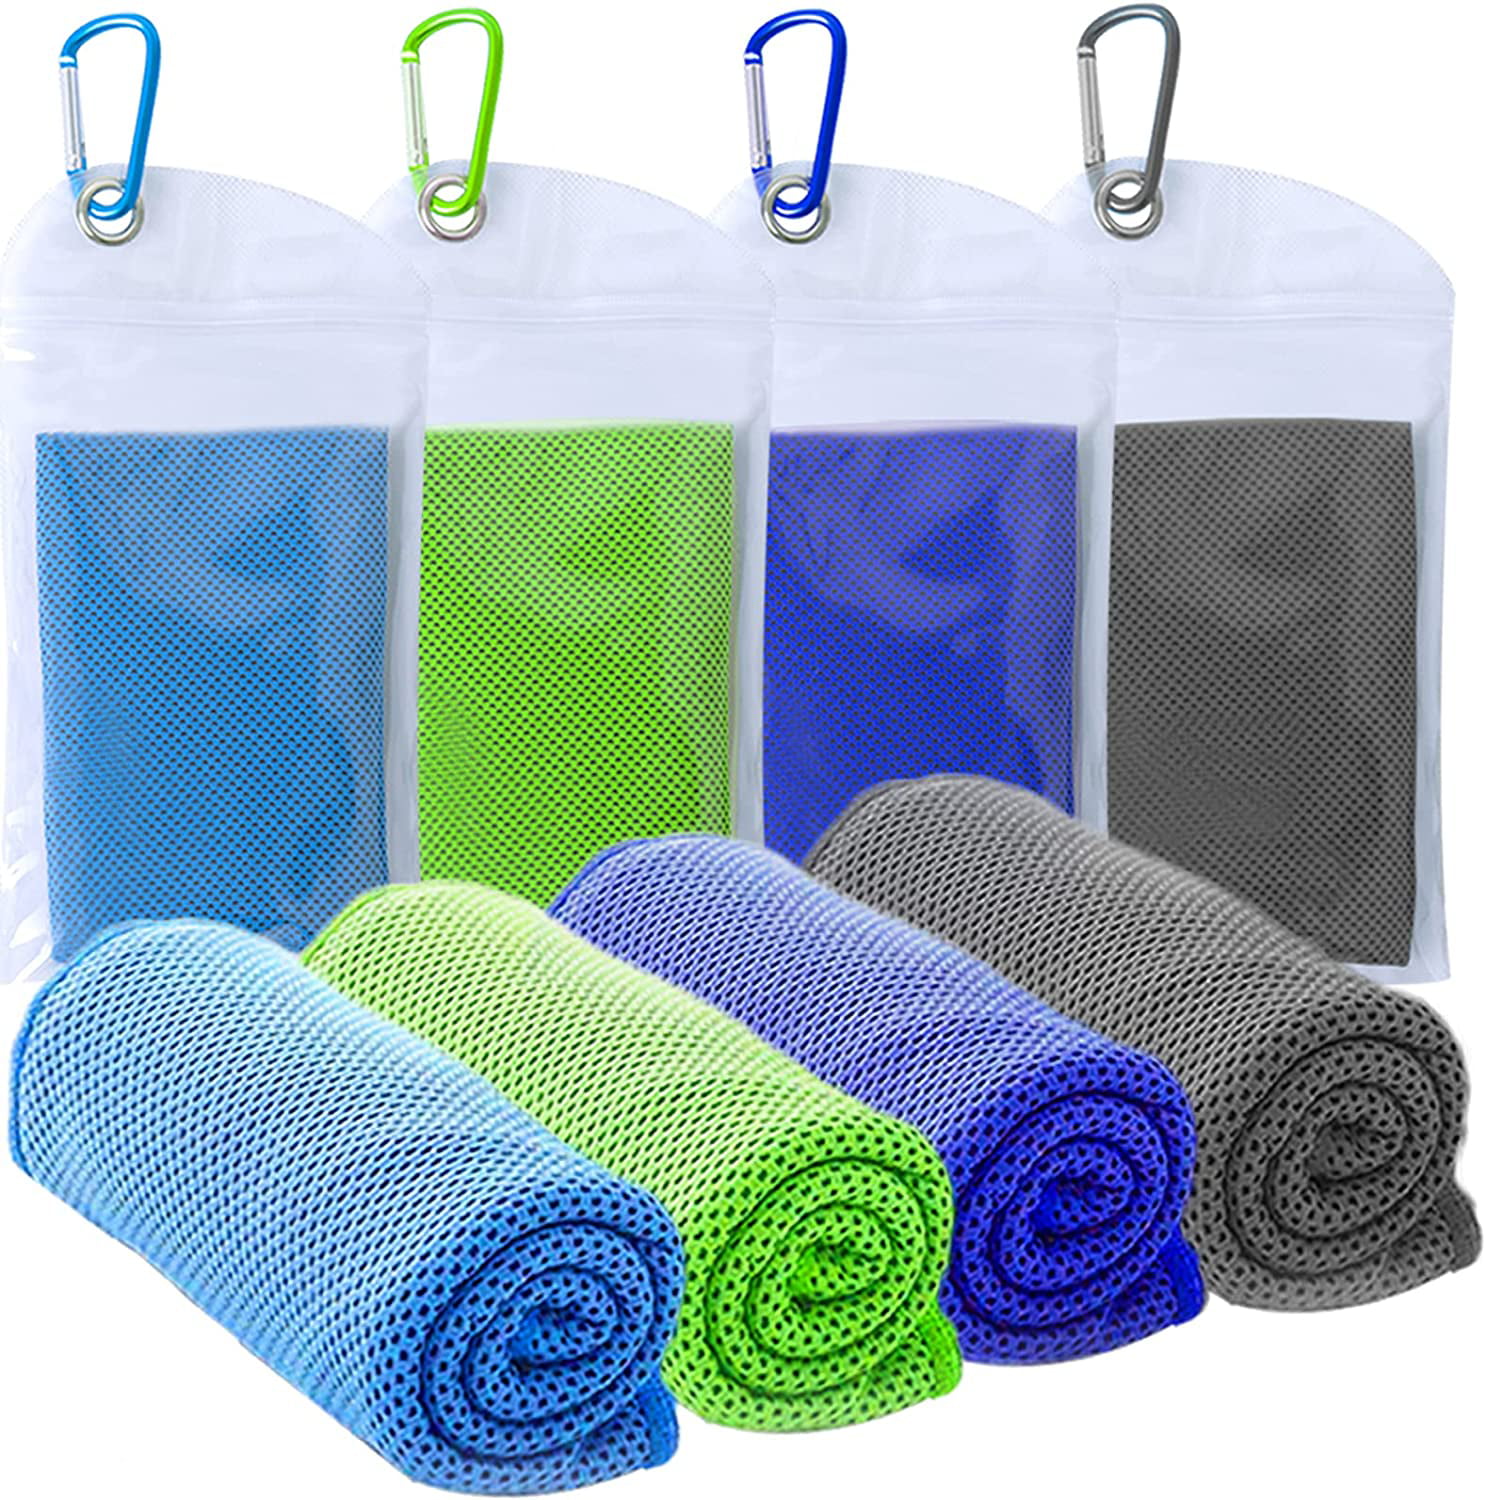 Large Bamboo Fiber Hand Face Towel Gym Beach Swimming Camping Travel Sports Yoga